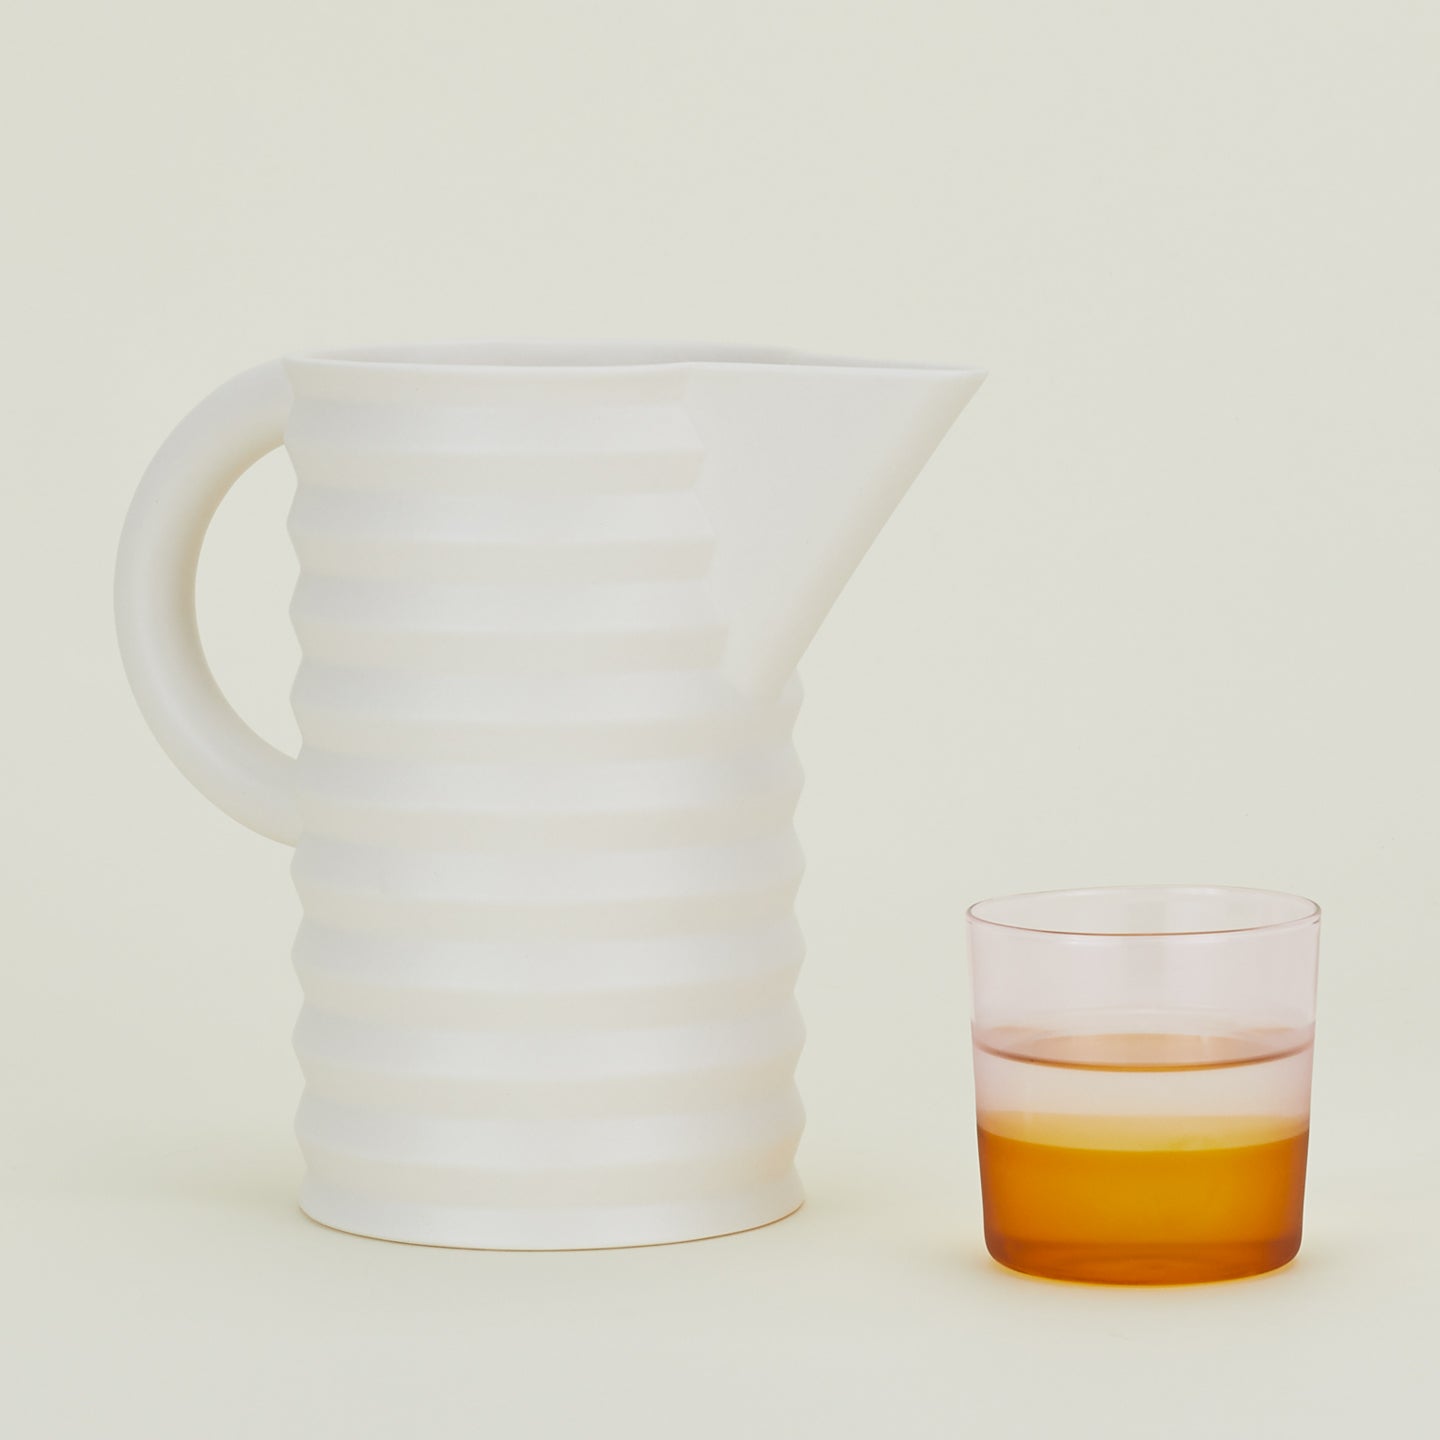 Pleated Pitcher along with a drinking glass.